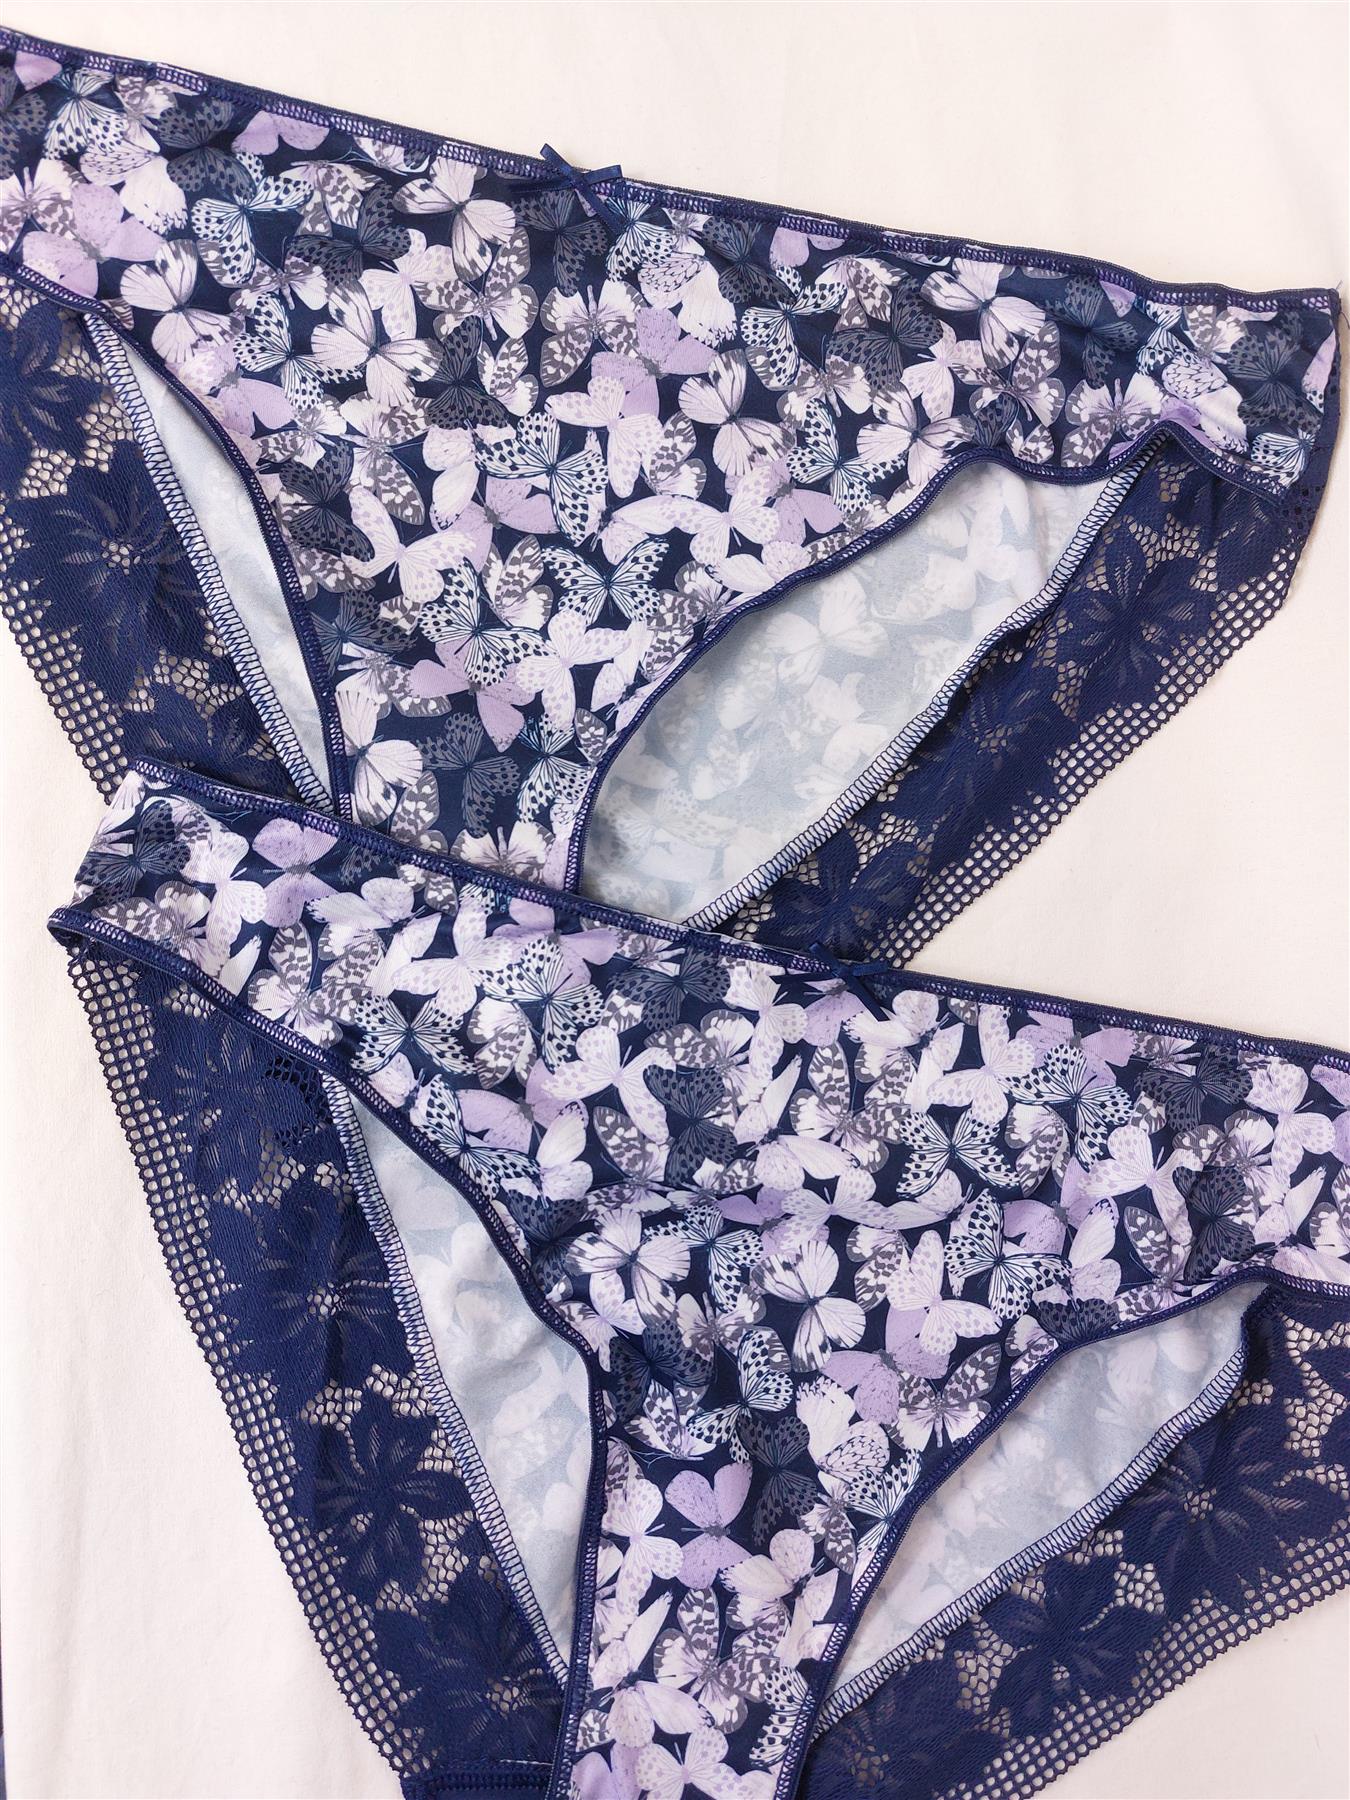 2-Pack High Leg Knickers Navy Butterfly Print Floral Lace Trim Multipack 12-20